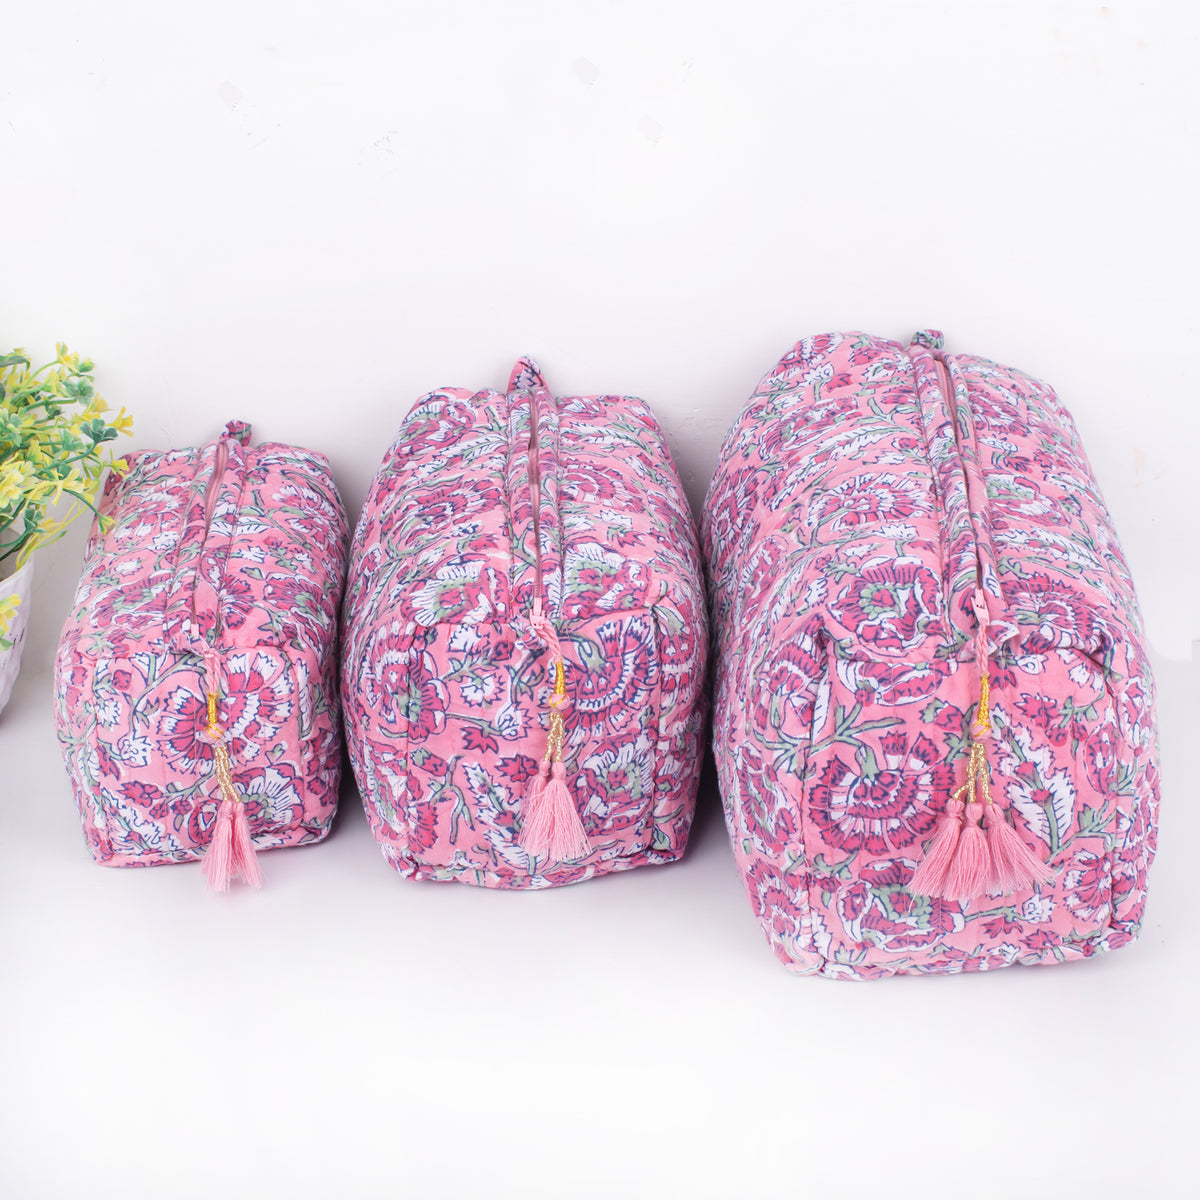 Cotton Quilted Block Printed Toiletry Bags Set, Wash Bags Set of 2  ,cosmetic Bags, Travel Holiday Bags 